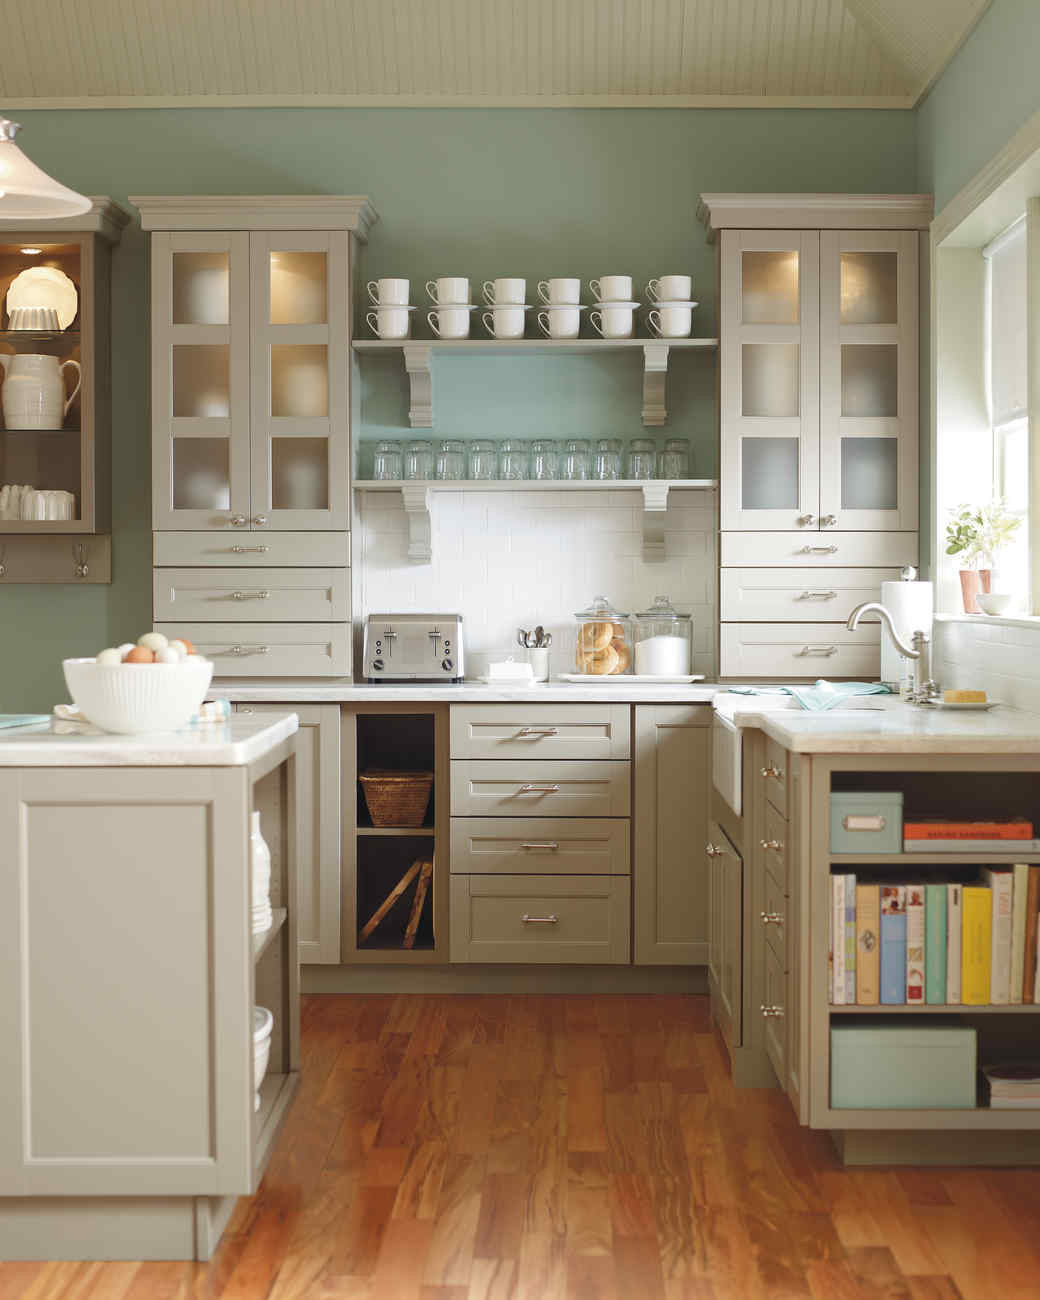 Best Colors For Small Kitchen
 How to Pick Kitchen Paint Colors